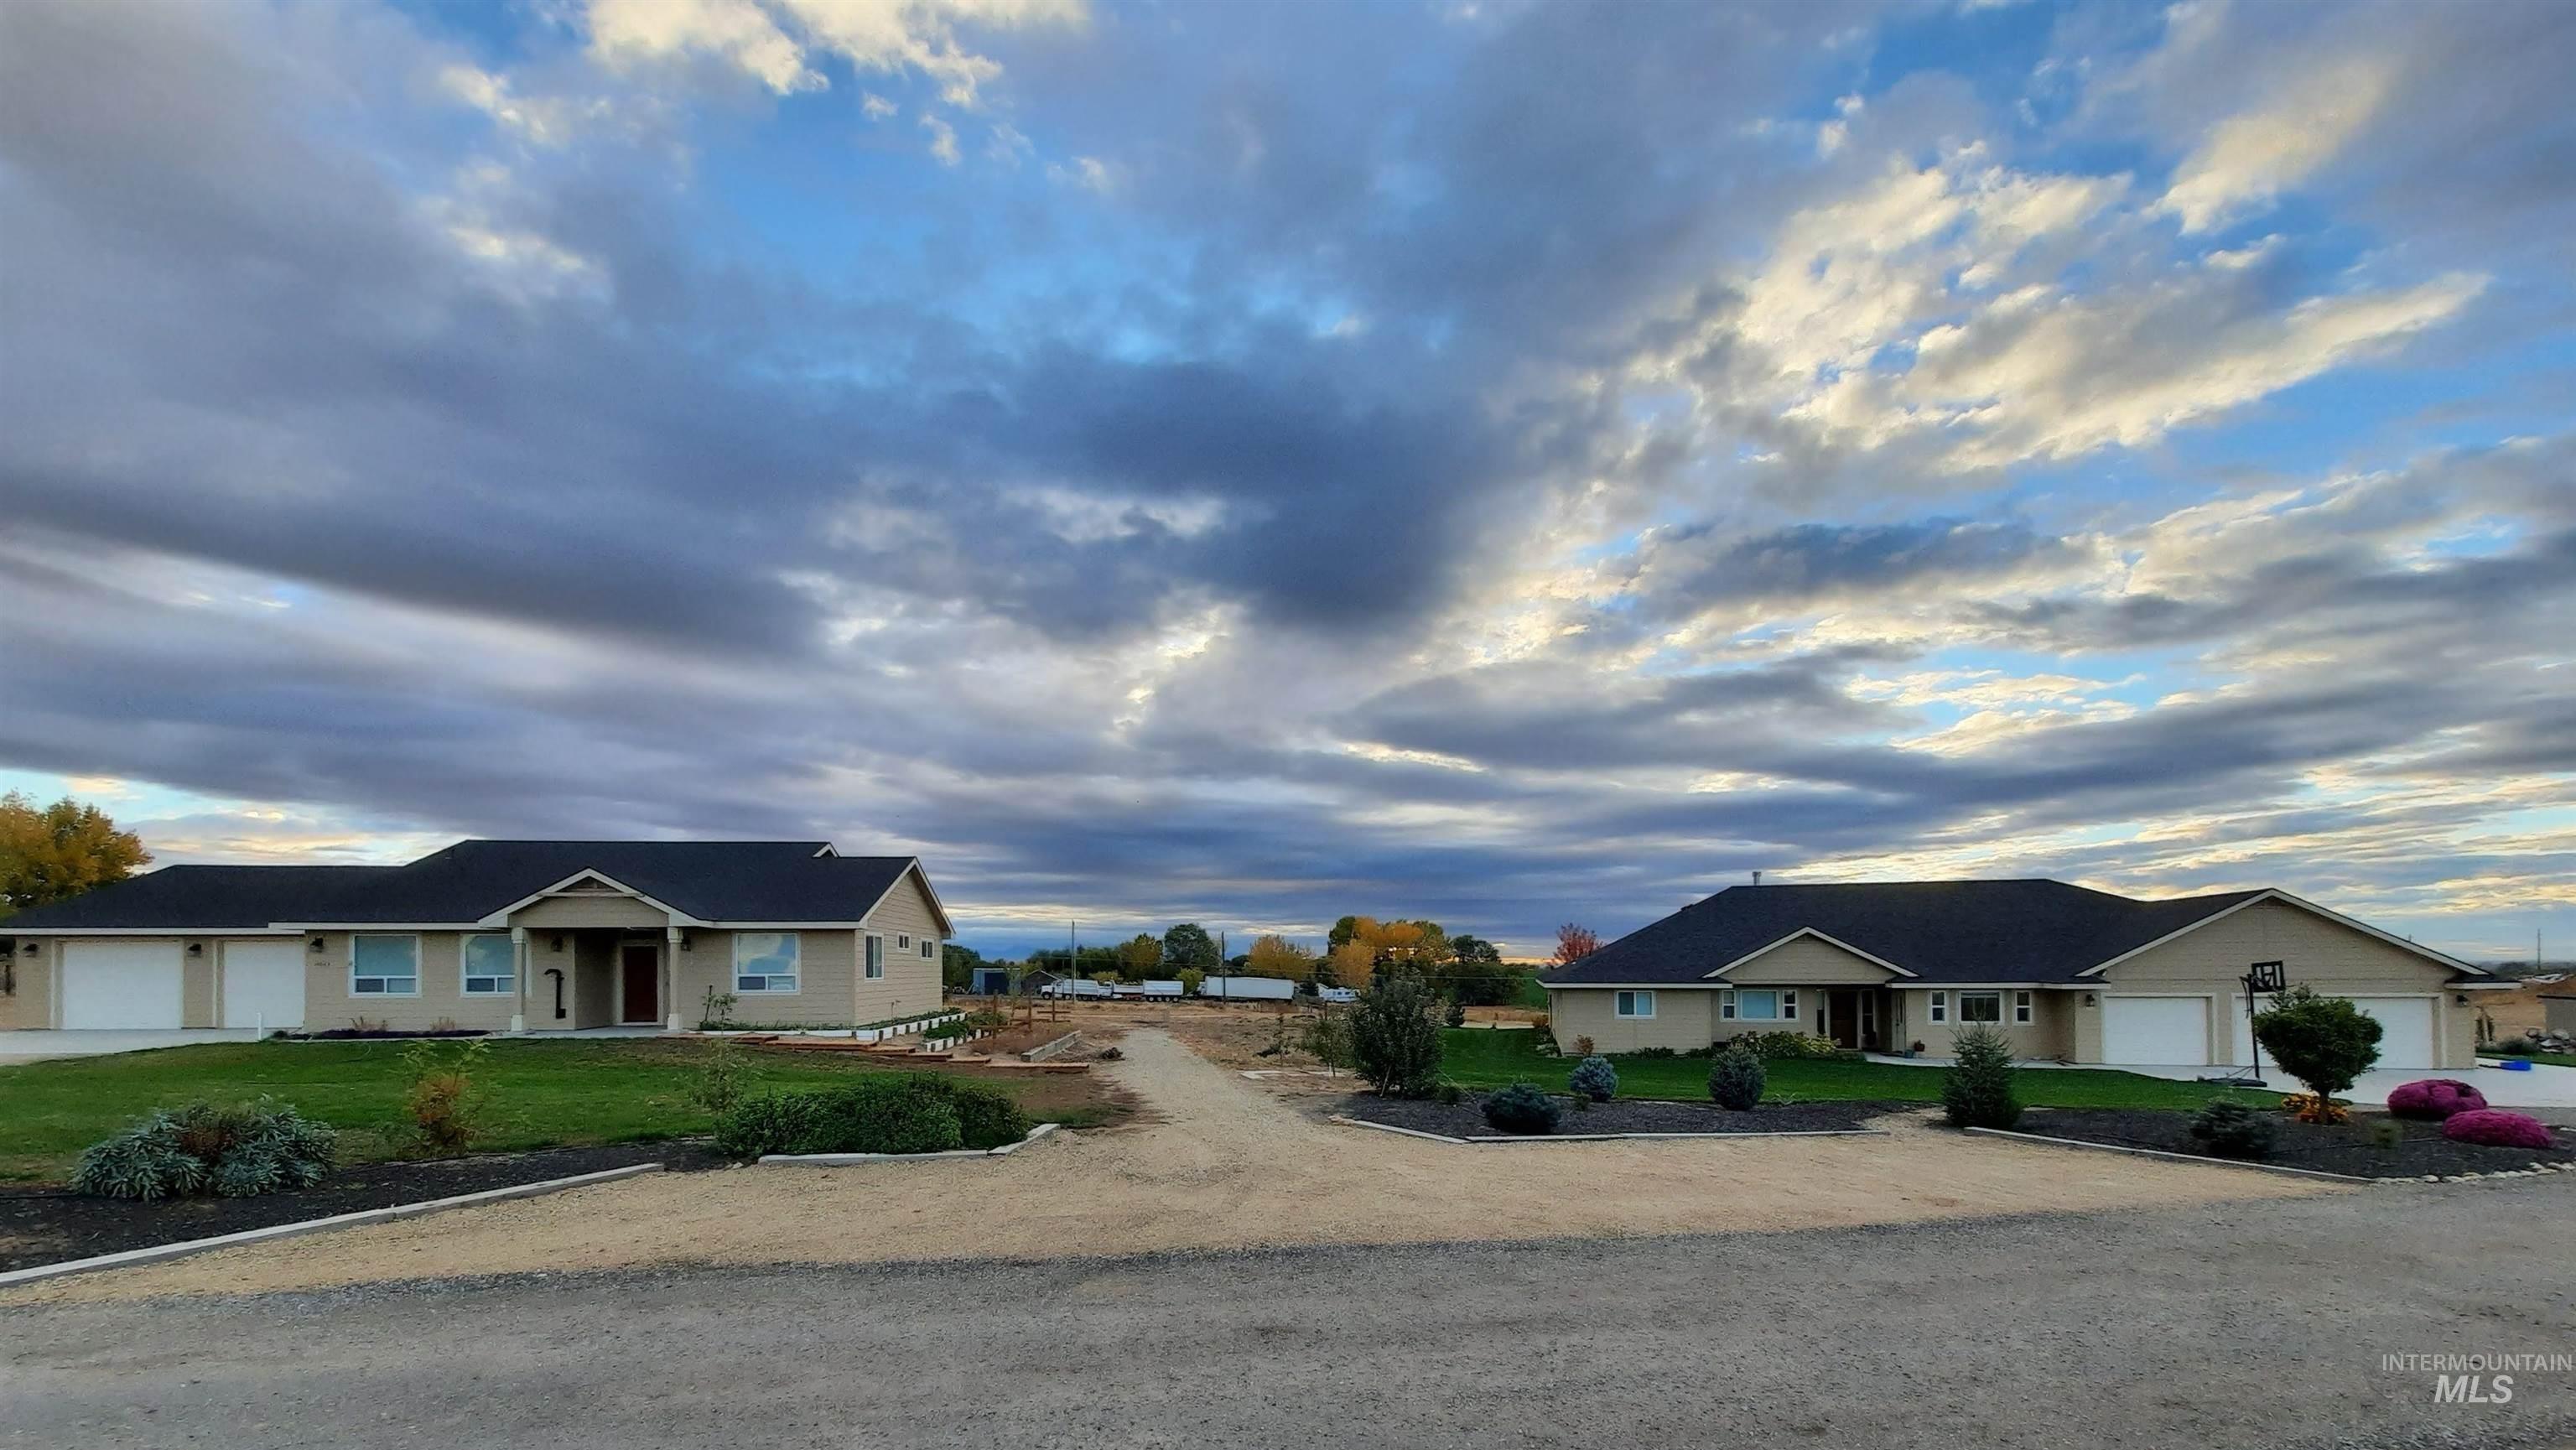 14041 Crossview Lane, Caldwell, Idaho 83607, 6 Bedrooms, 5.5 Bathrooms, Residential For Sale, Price $1,285,000,MLS 98903390